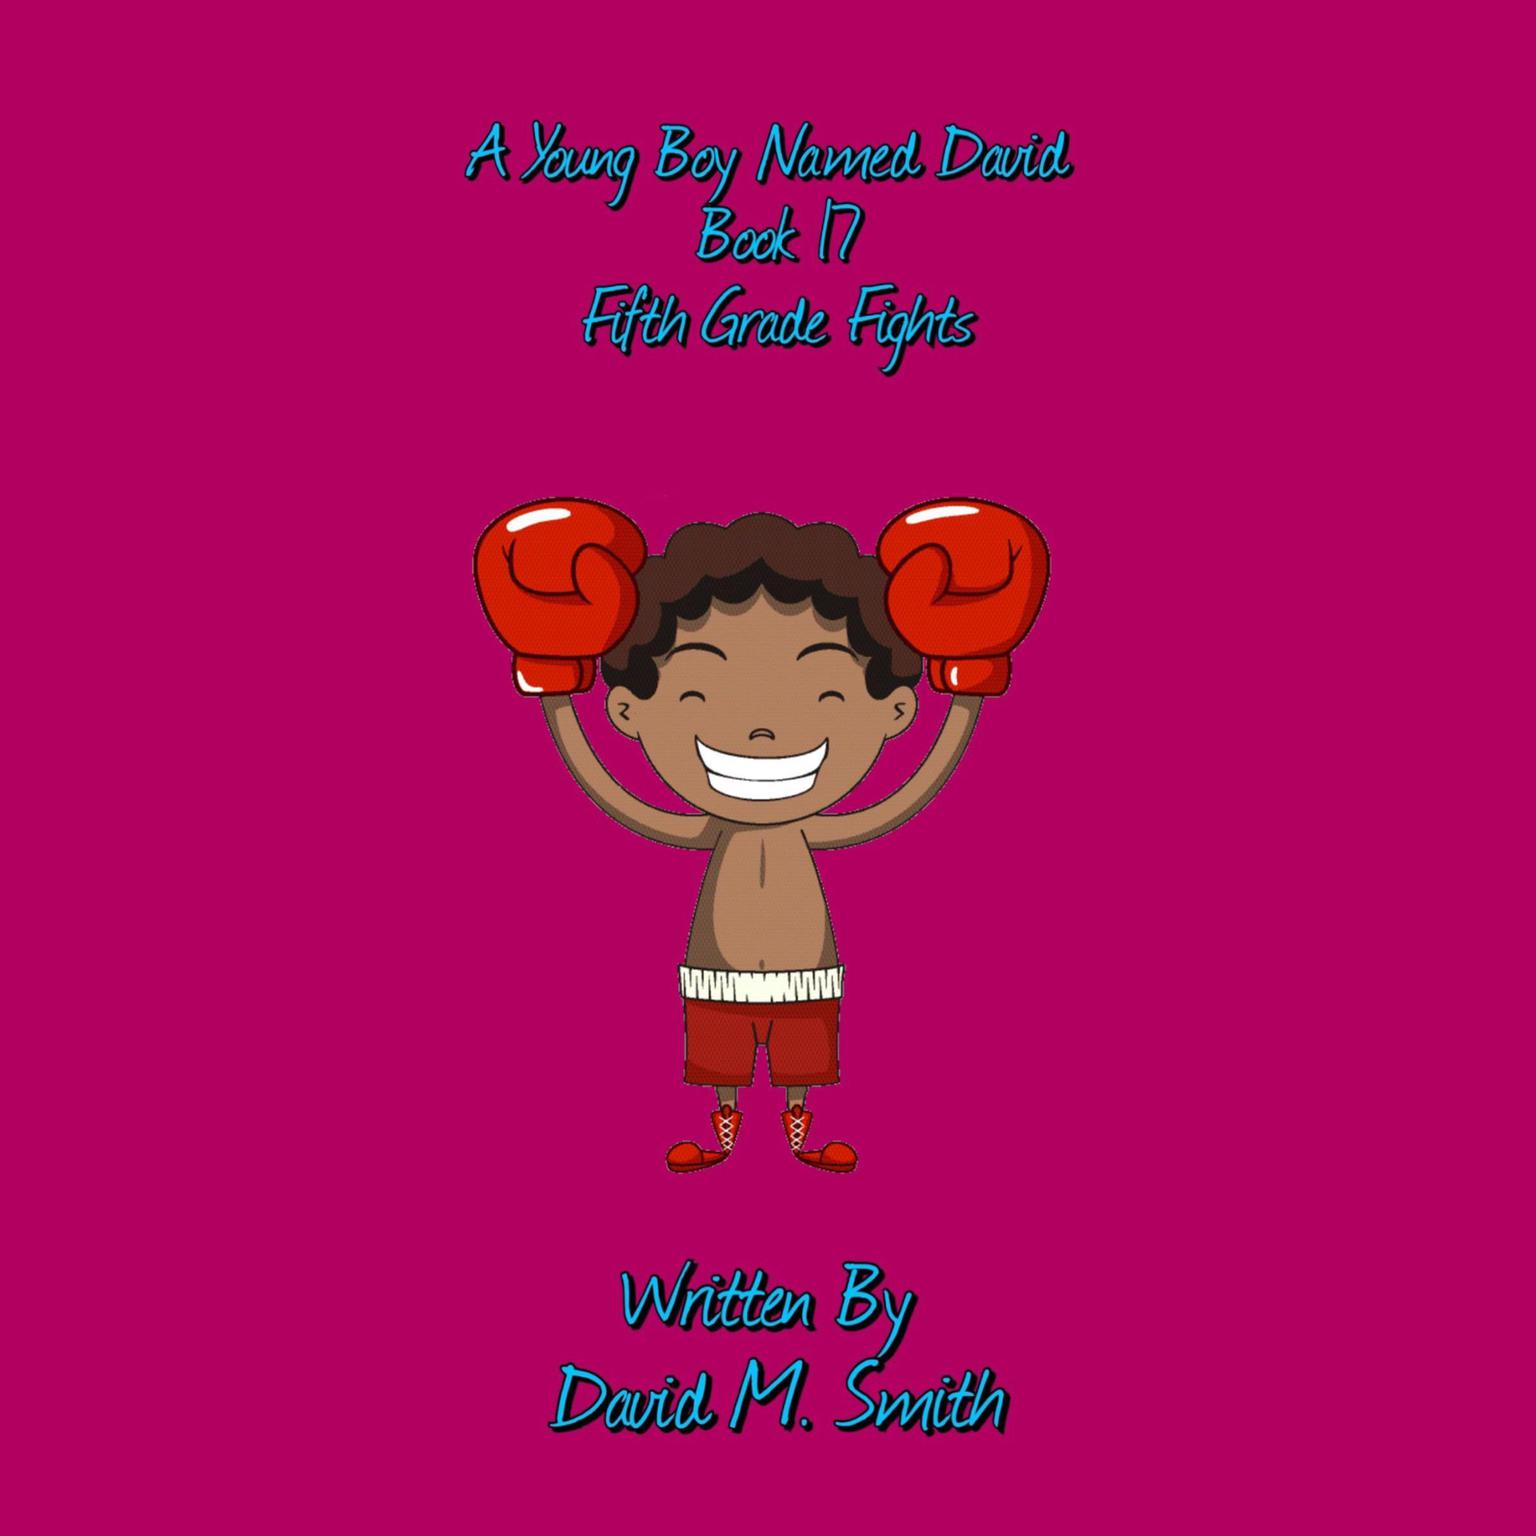 A Young Boy Named David Book 17: Fifth Grade Fights Audiobook, by David M. Smith